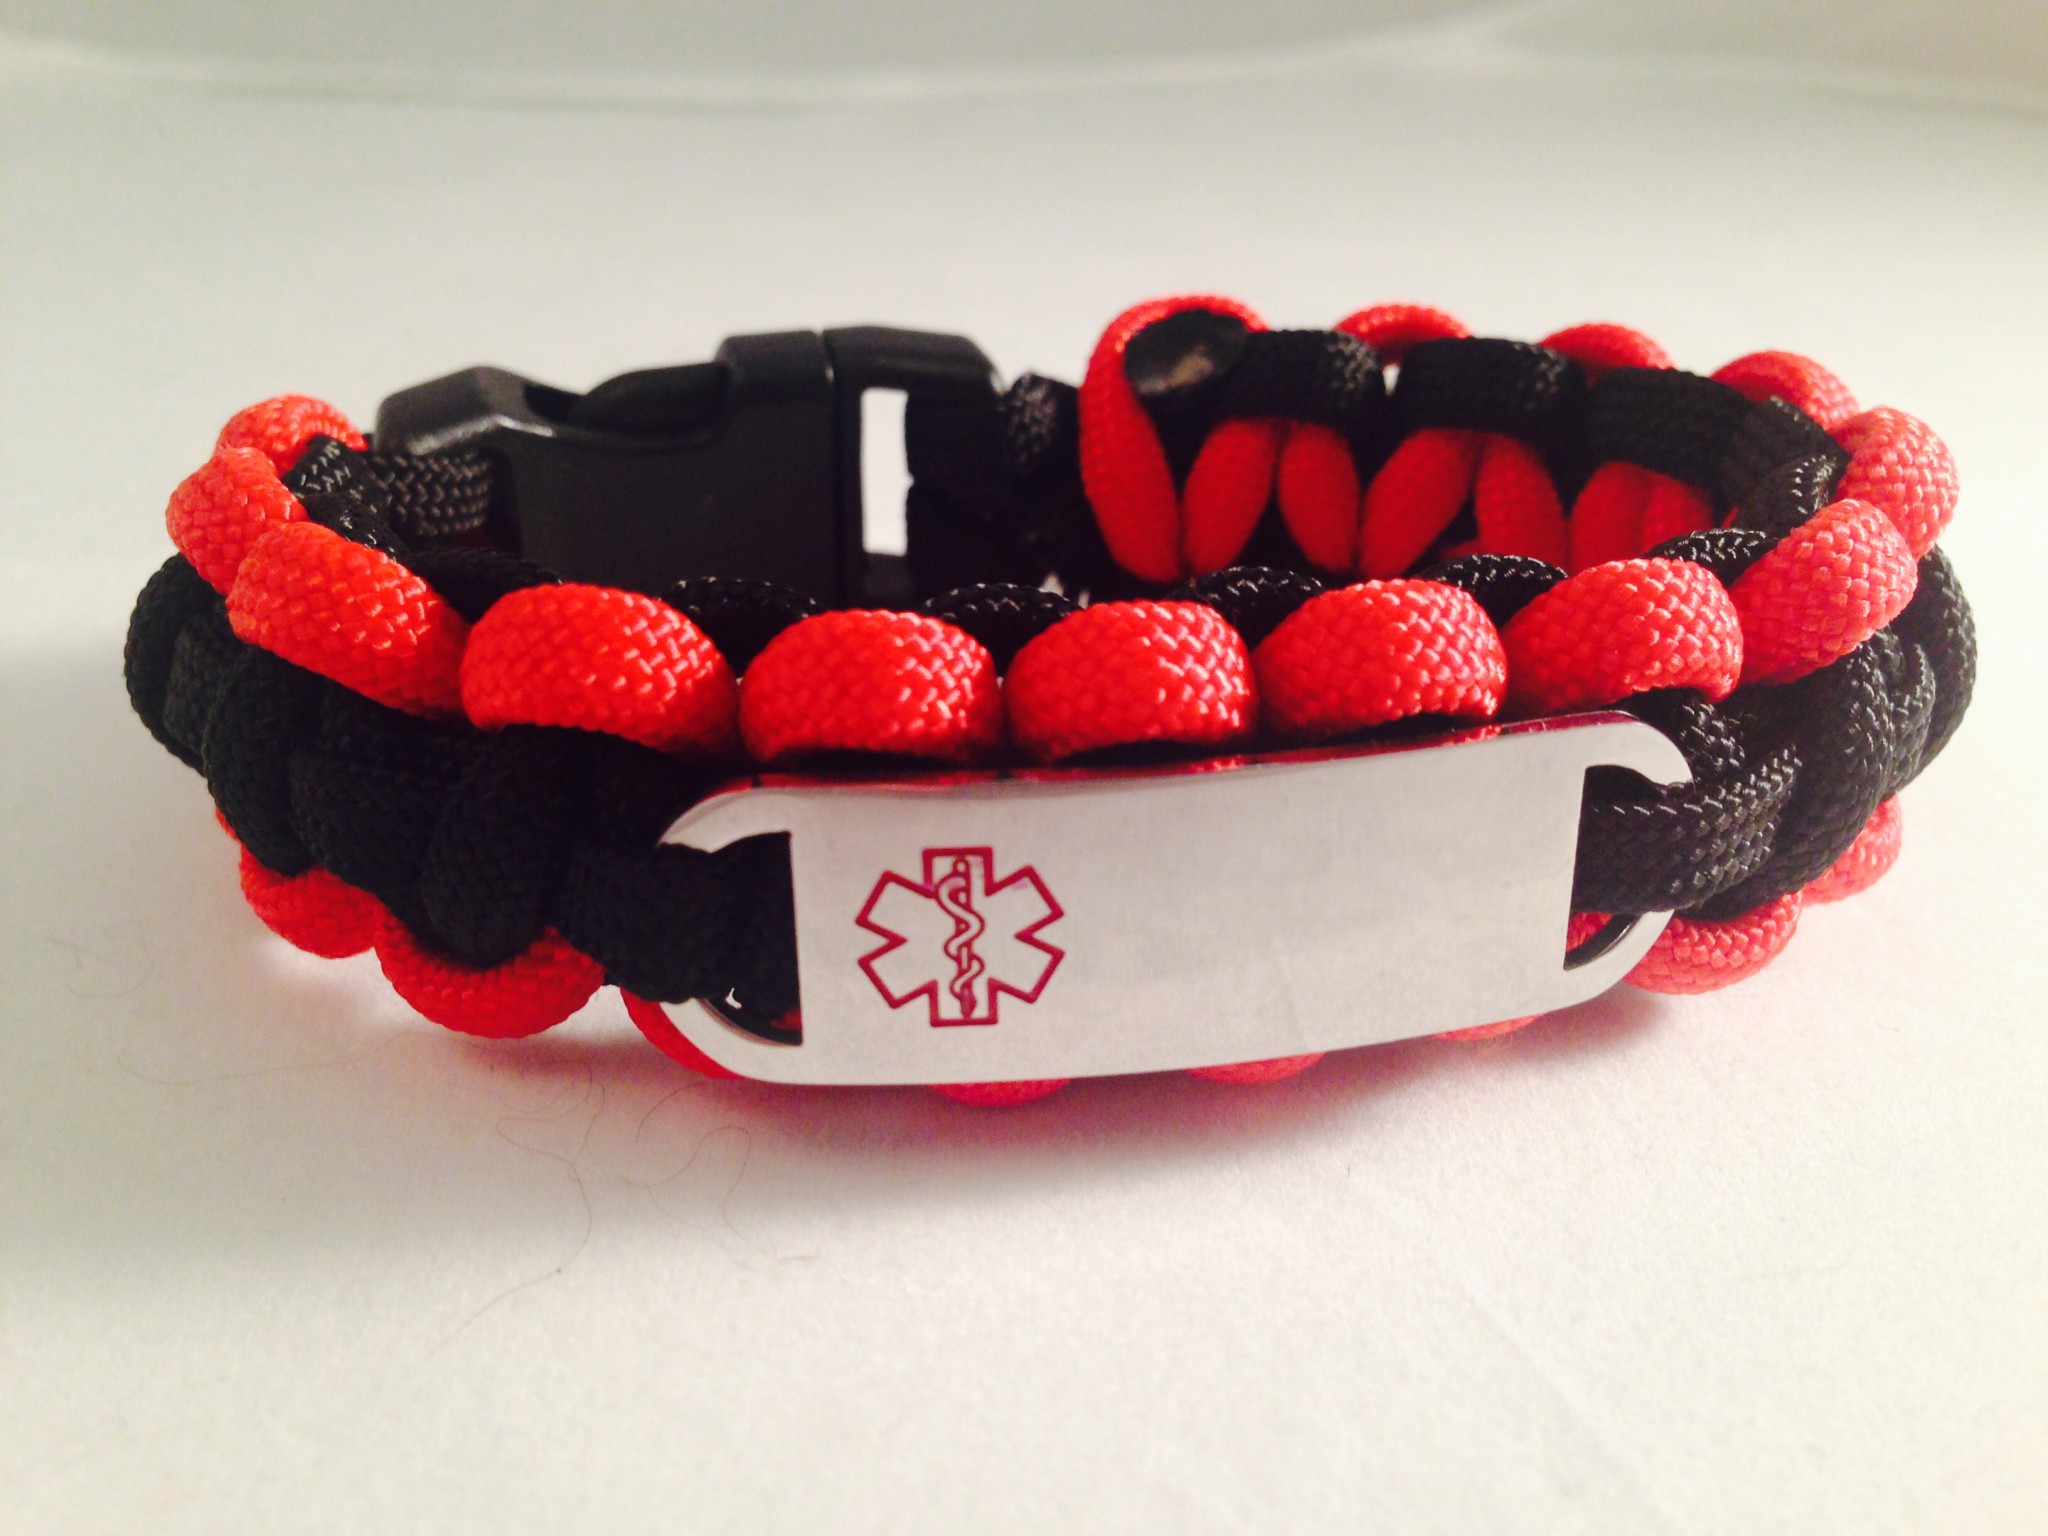 Made in the USA Medical alert bracelet personalized Sieraden Armbanden ID- & Medische armbanden Paracord bracelet in choice of color and text for kids or adults 